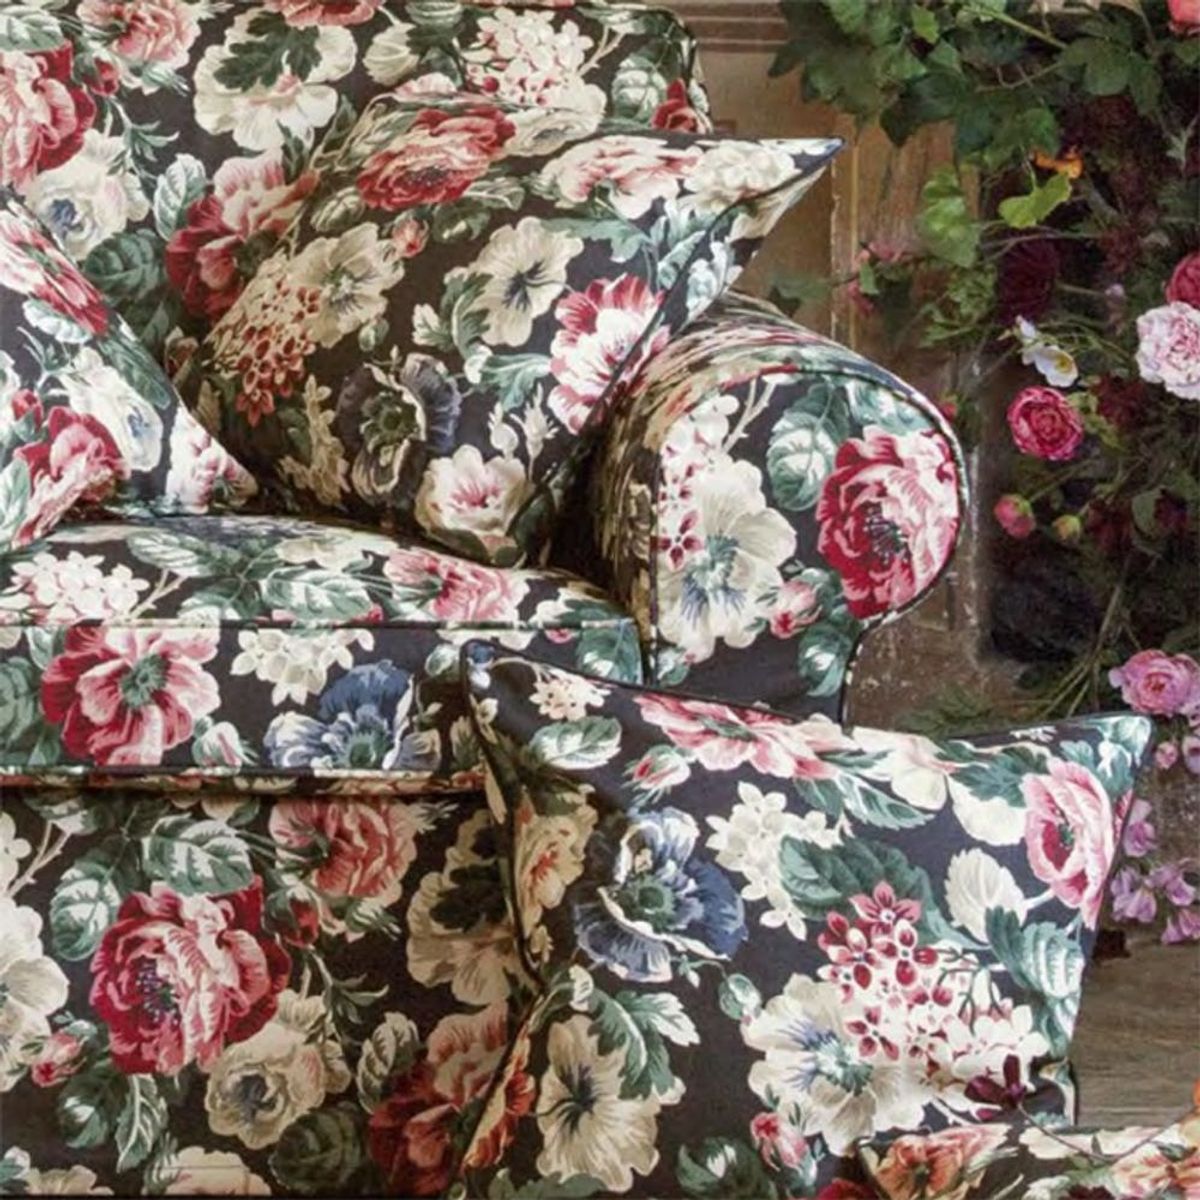 IKEA Just Released a Floral Couch That’s Totally Grandma-Approved